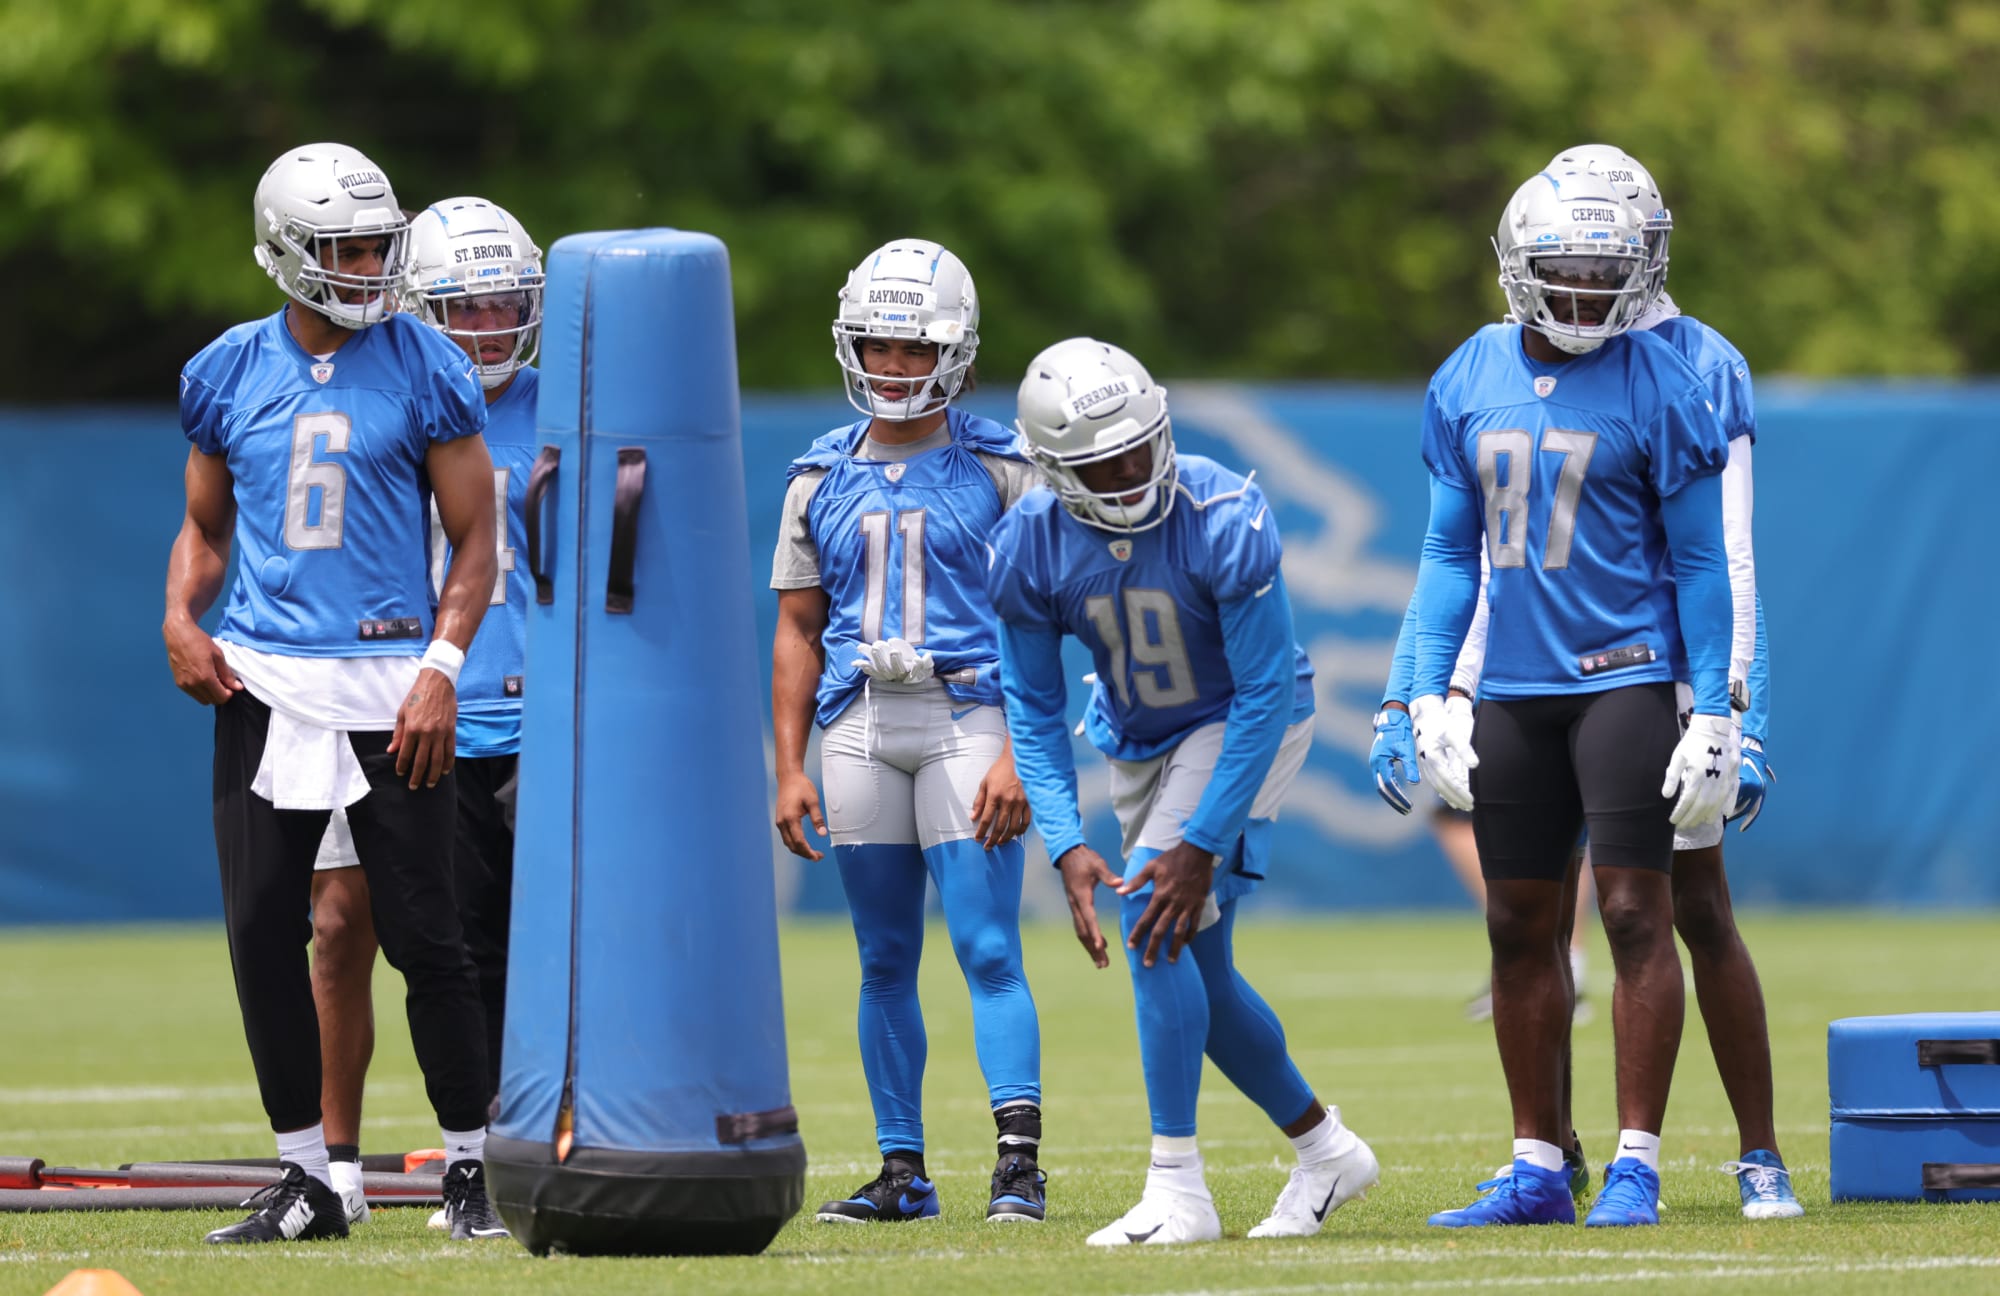 Who will emerge as the Lions top wide receiver in camp?